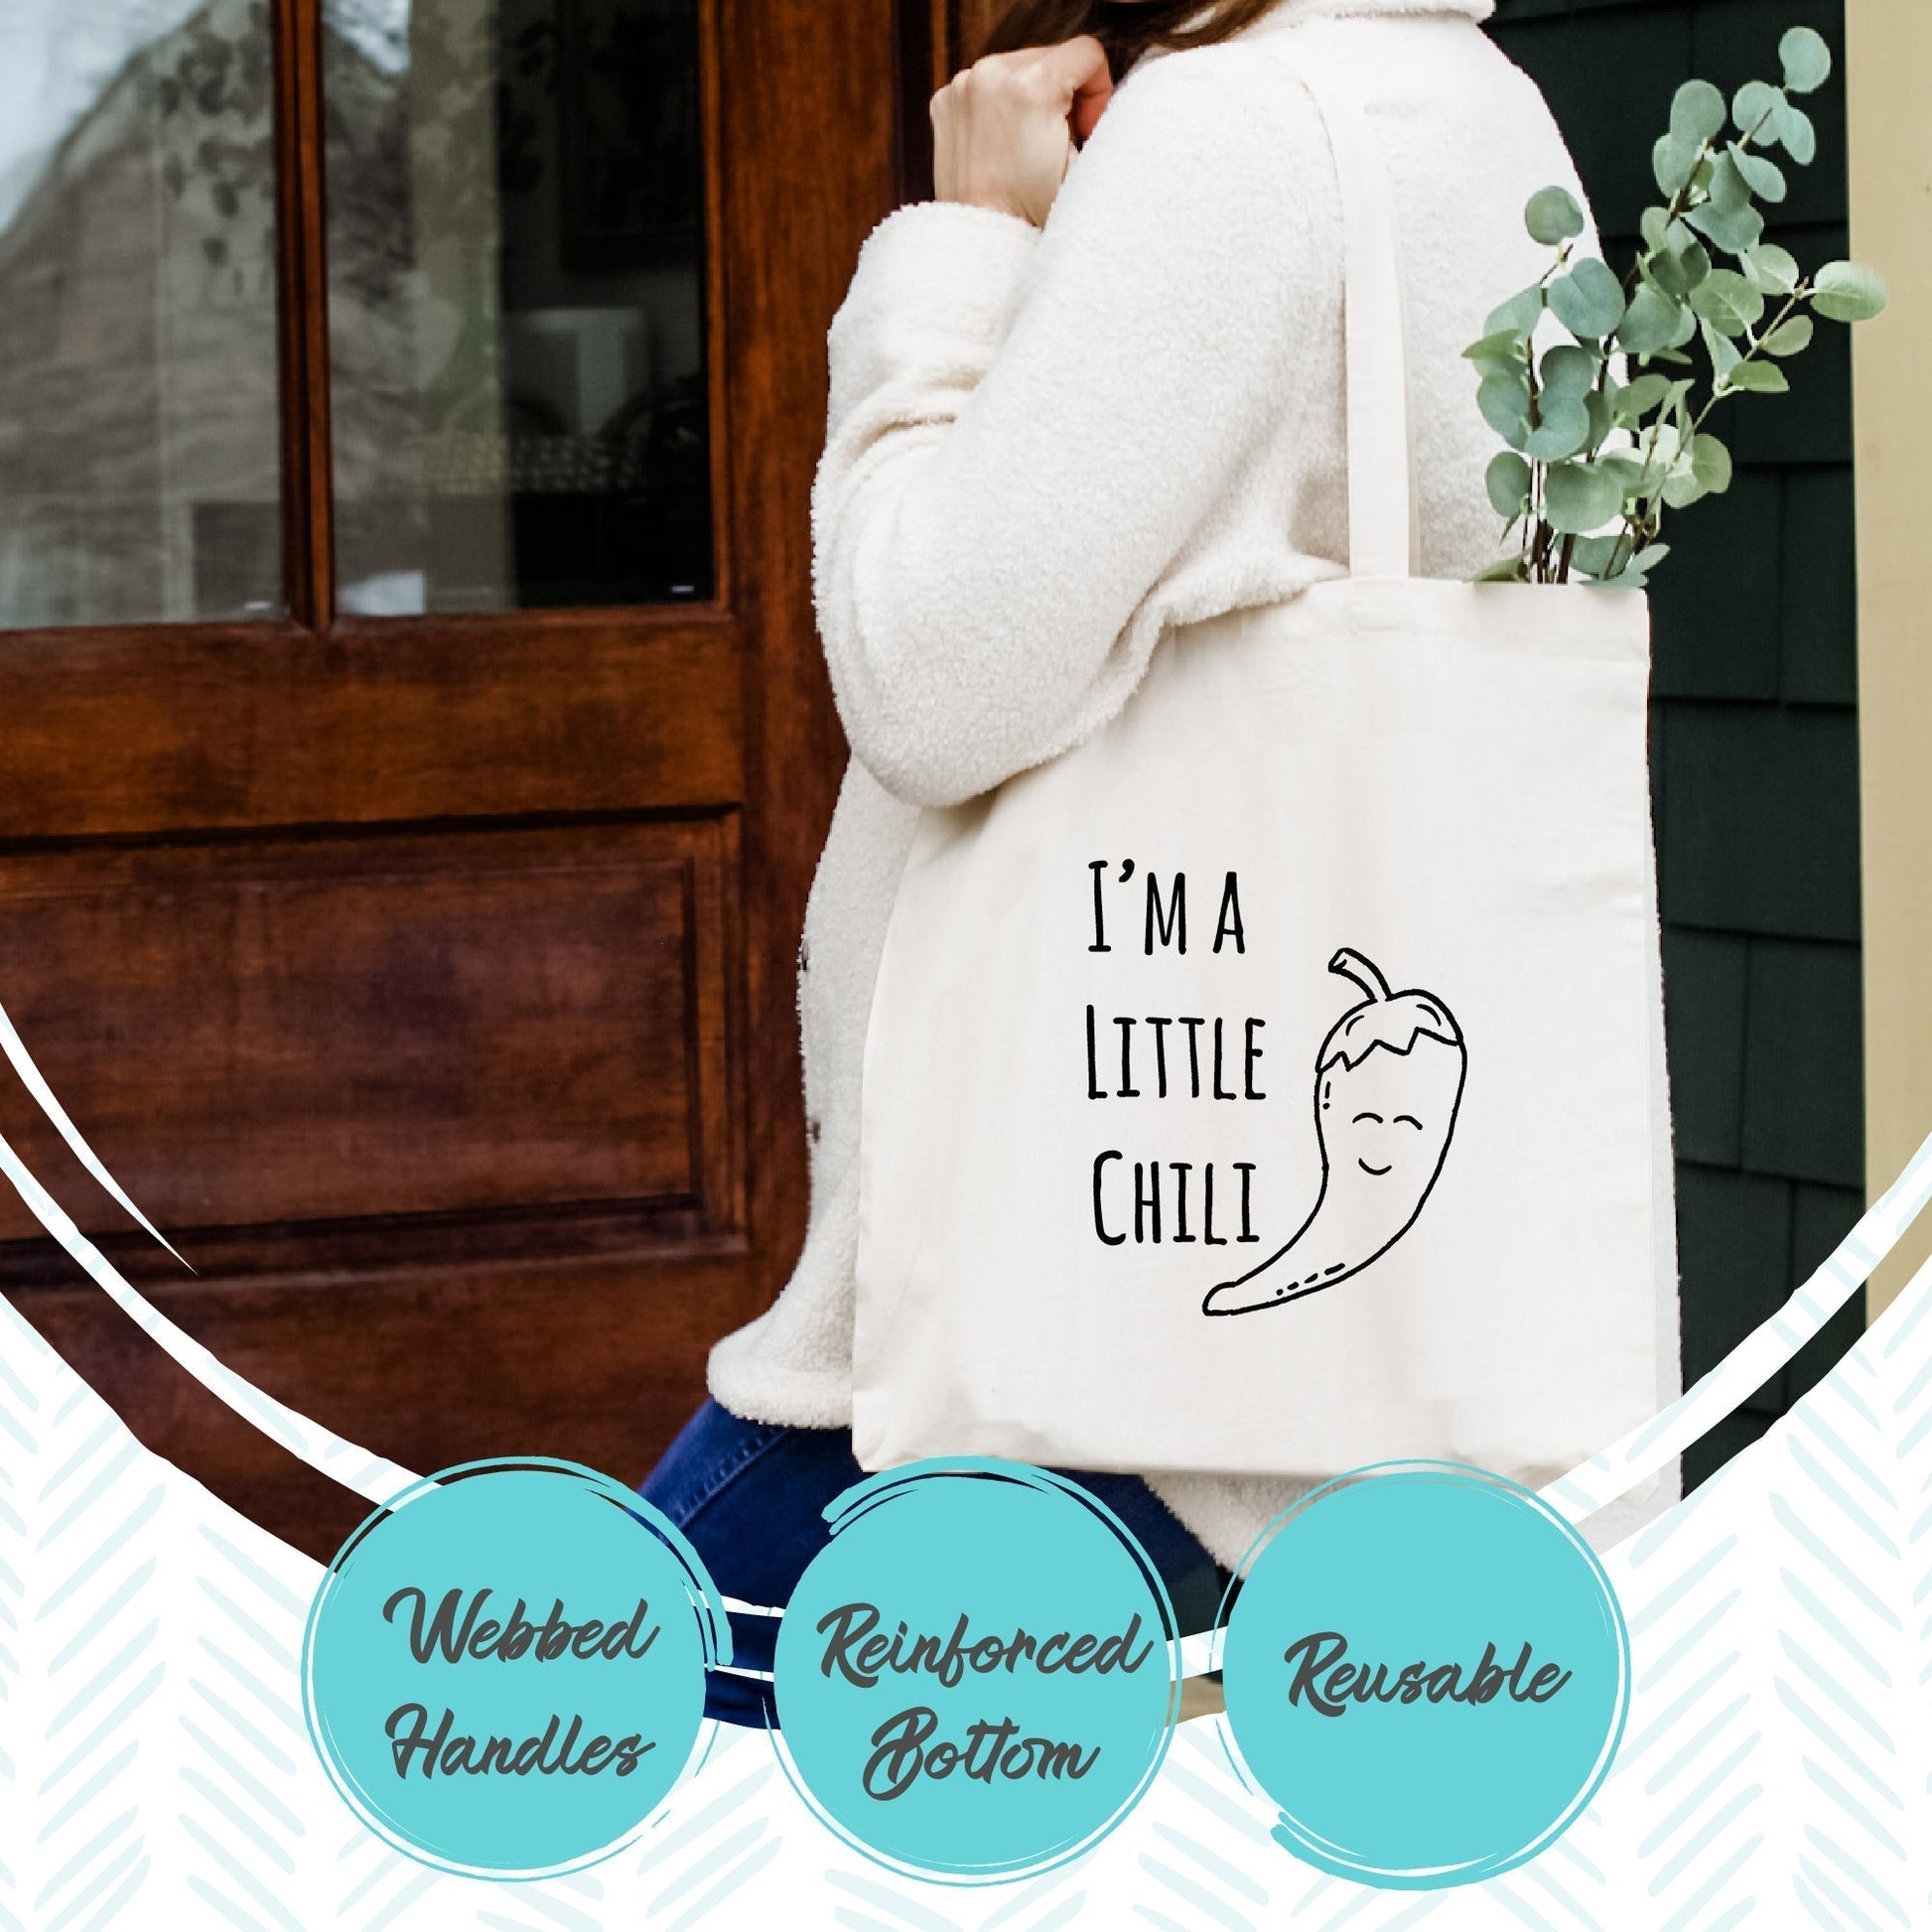 Dogs Welcome, People Tolerated - Tote Bag - MoonlightMakers